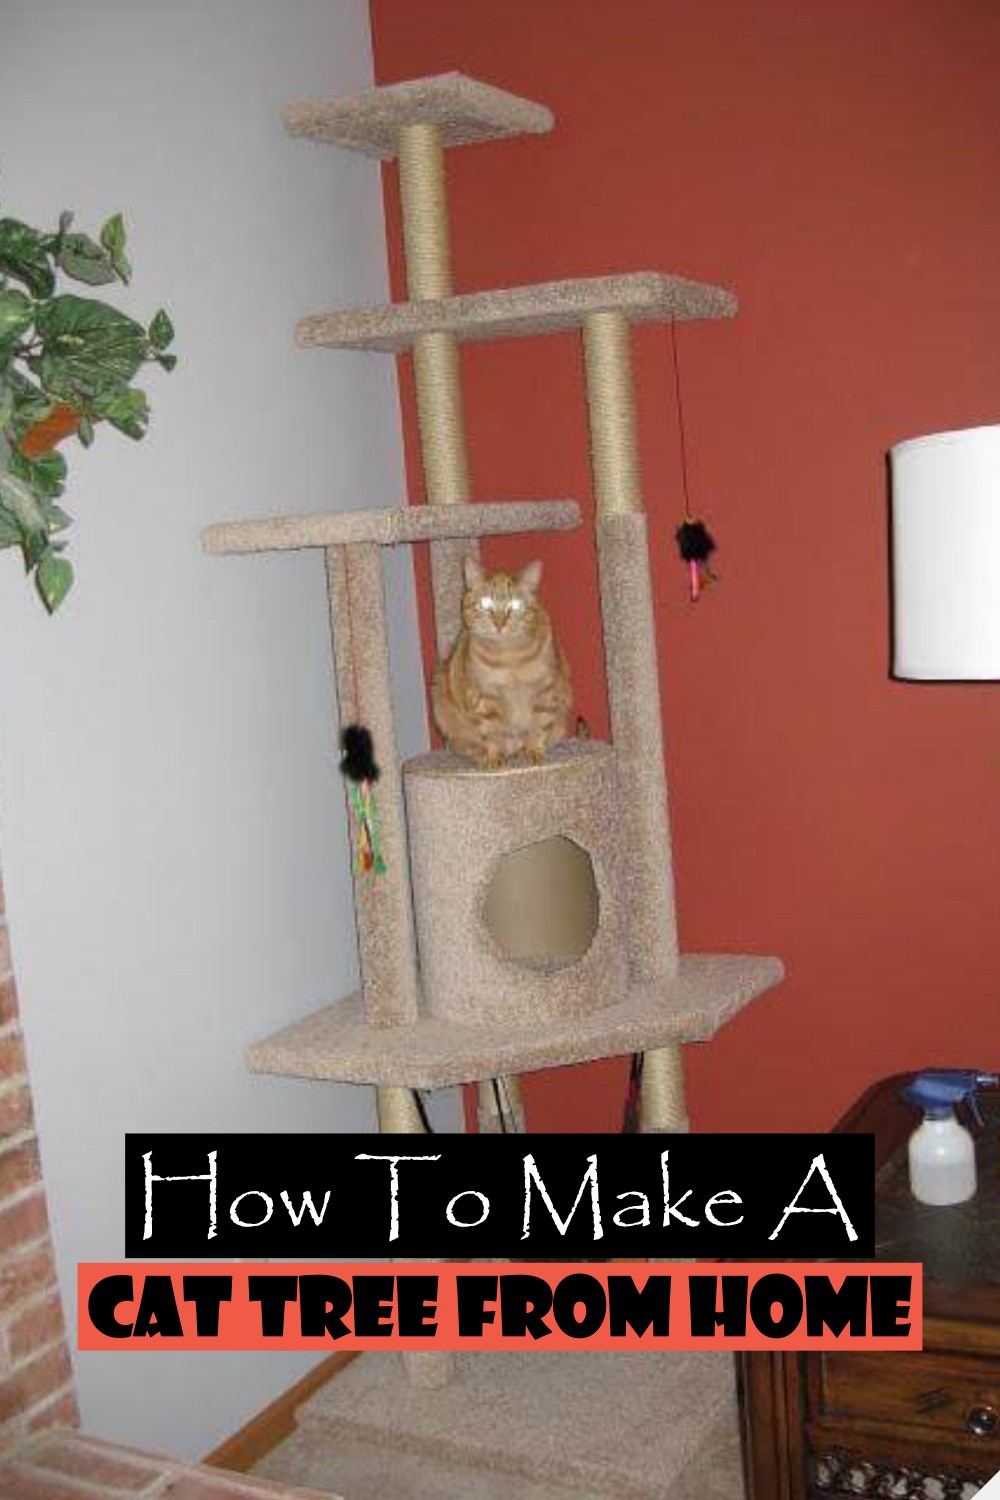 How To Make A Cat Tree From Home